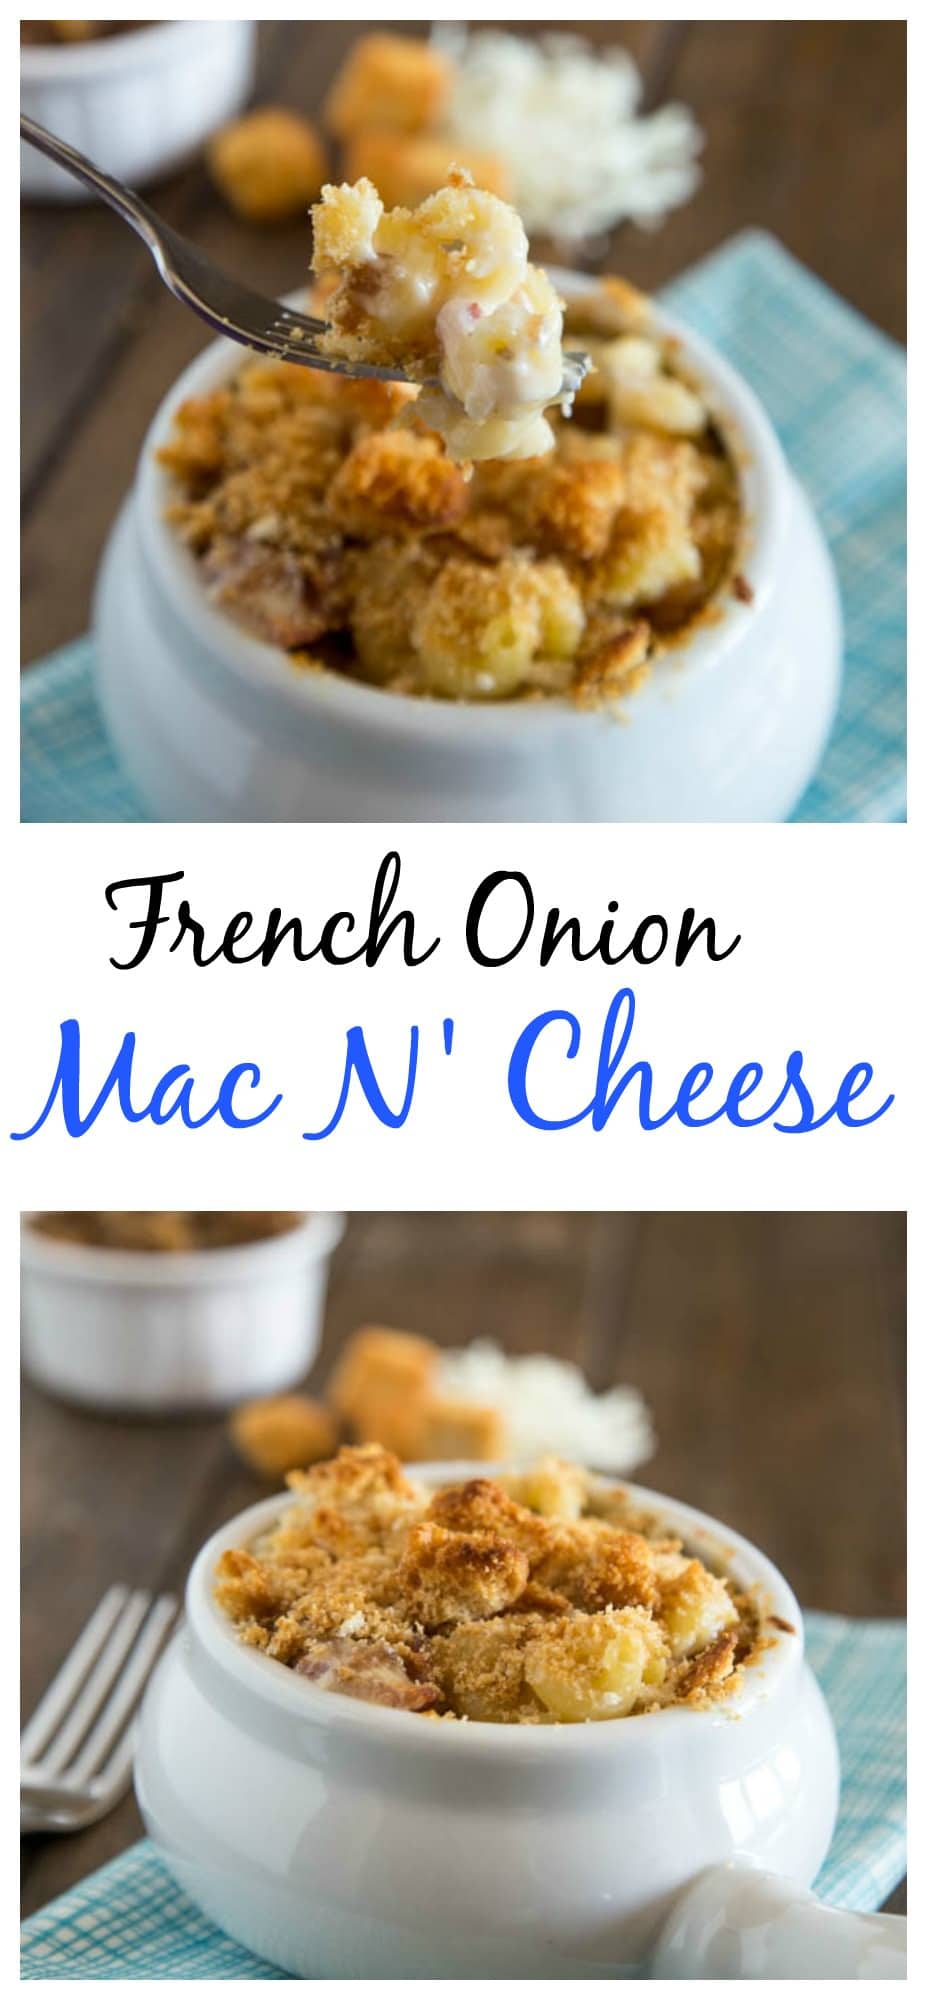 French Onion Mac N' Cheese - Creamy mac n' cheese with caramelized onion, bacon, and topped with croutons. 